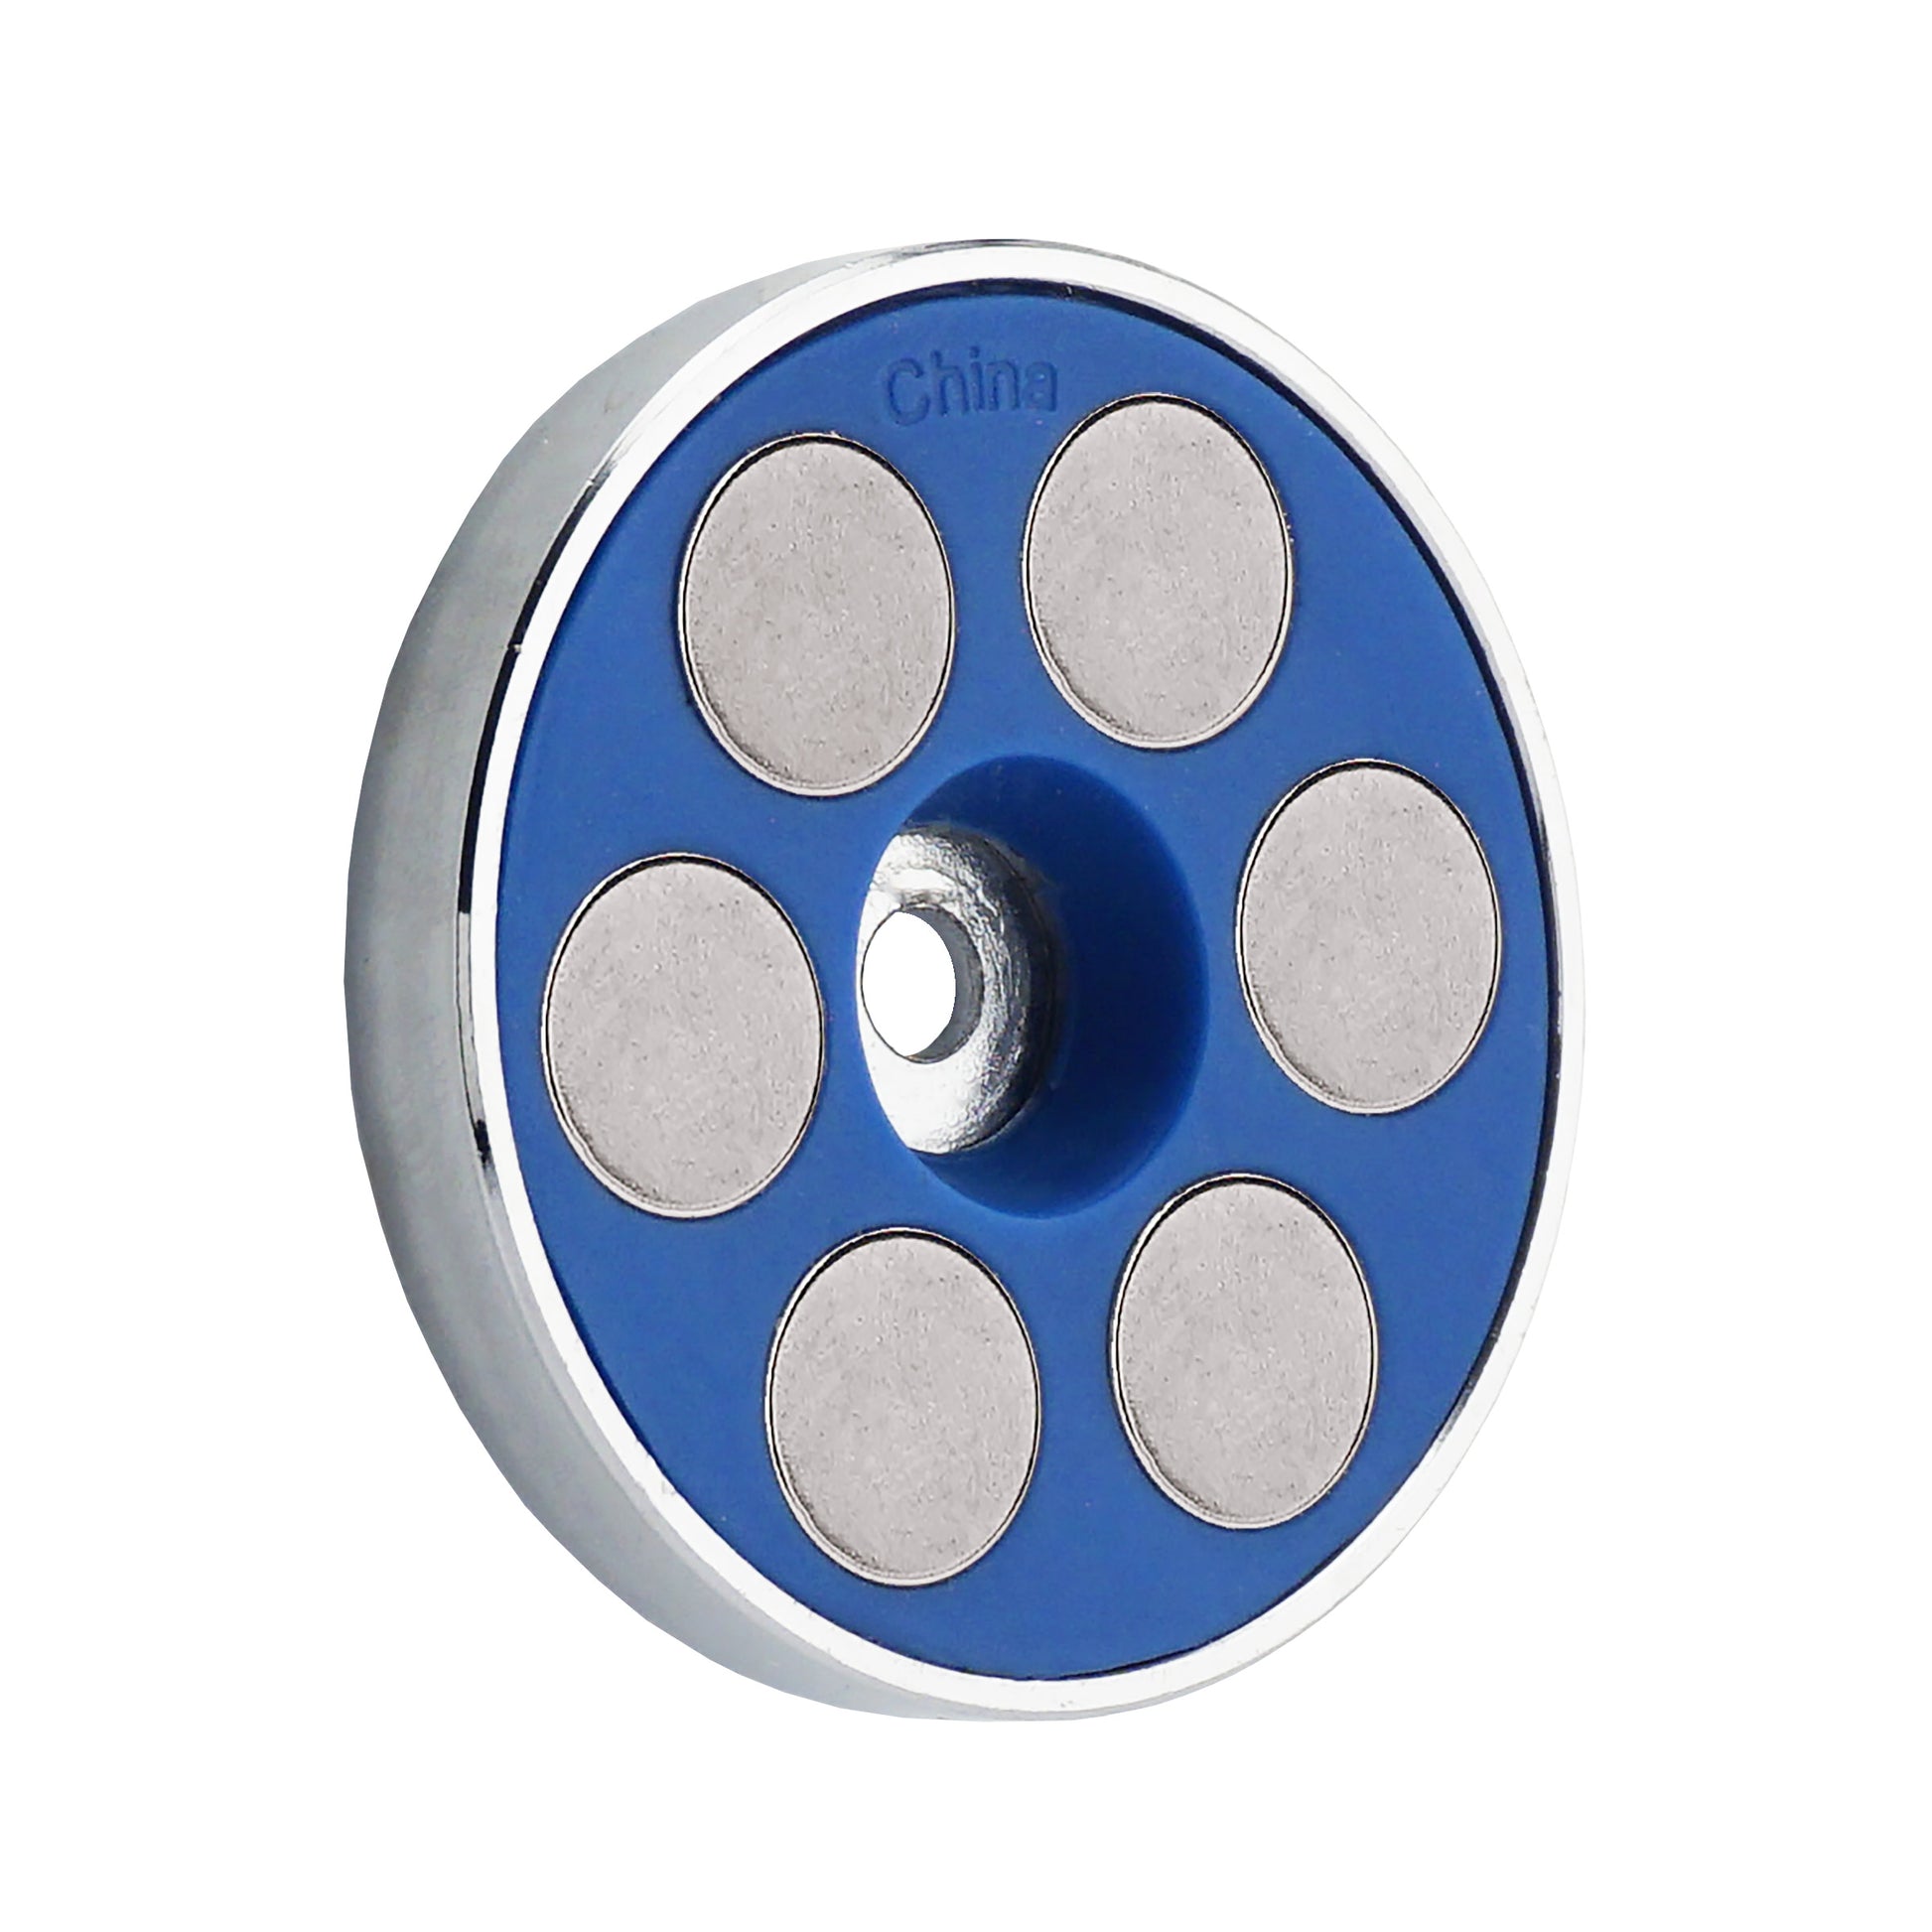 Load image into Gallery viewer, 07606 Super Blue™ Neodymium Round Base Magnet - 45 Degree Angle View